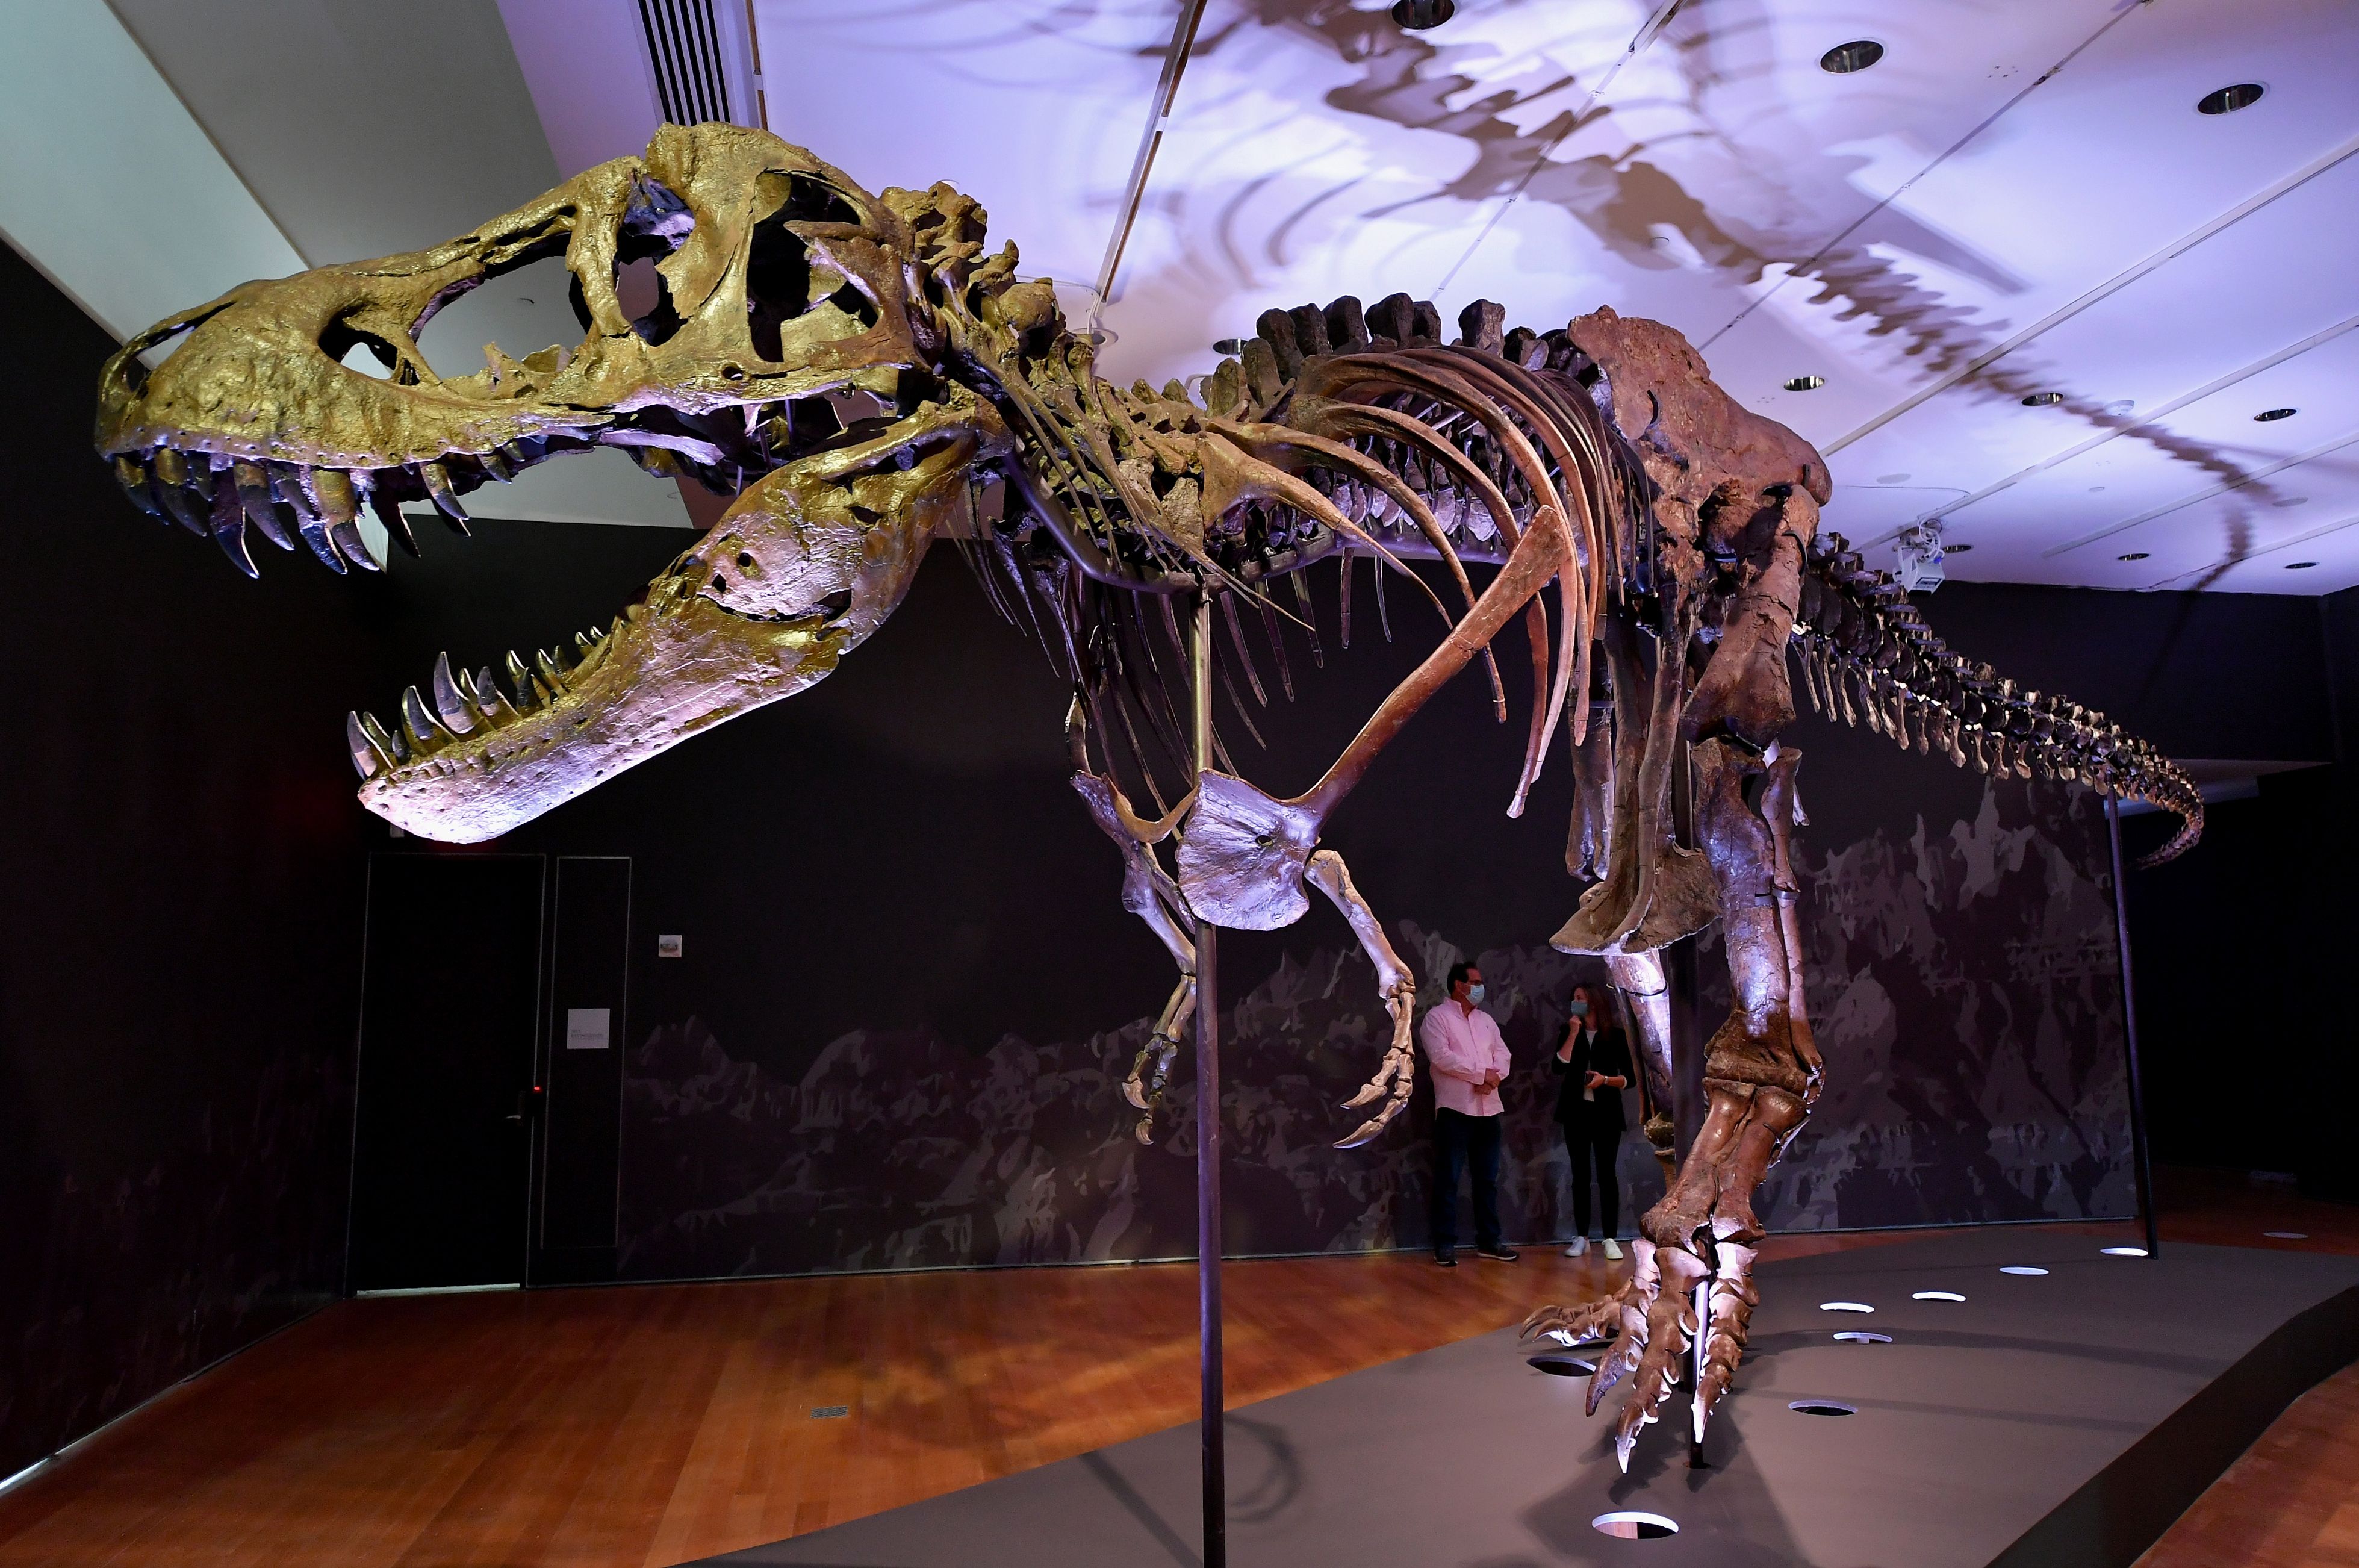 A Tyrannosaurus rex (T-Rex) skeleton, named Stan is on display during a press preview at Christie's Rockefeller Center on September 15, 2020 in New York City. - The skeleton of a 40-foot (12-meter) dinosaur nicknamed "Stan", one of the most complete Tyrannosaurus rex specimens ever found, will be auctioned in New York next month and could set a record for a sale of its kind. (Photo by Angela Weiss / AFP) (Photo by ANGELA WEISS/AFP via Getty Images)